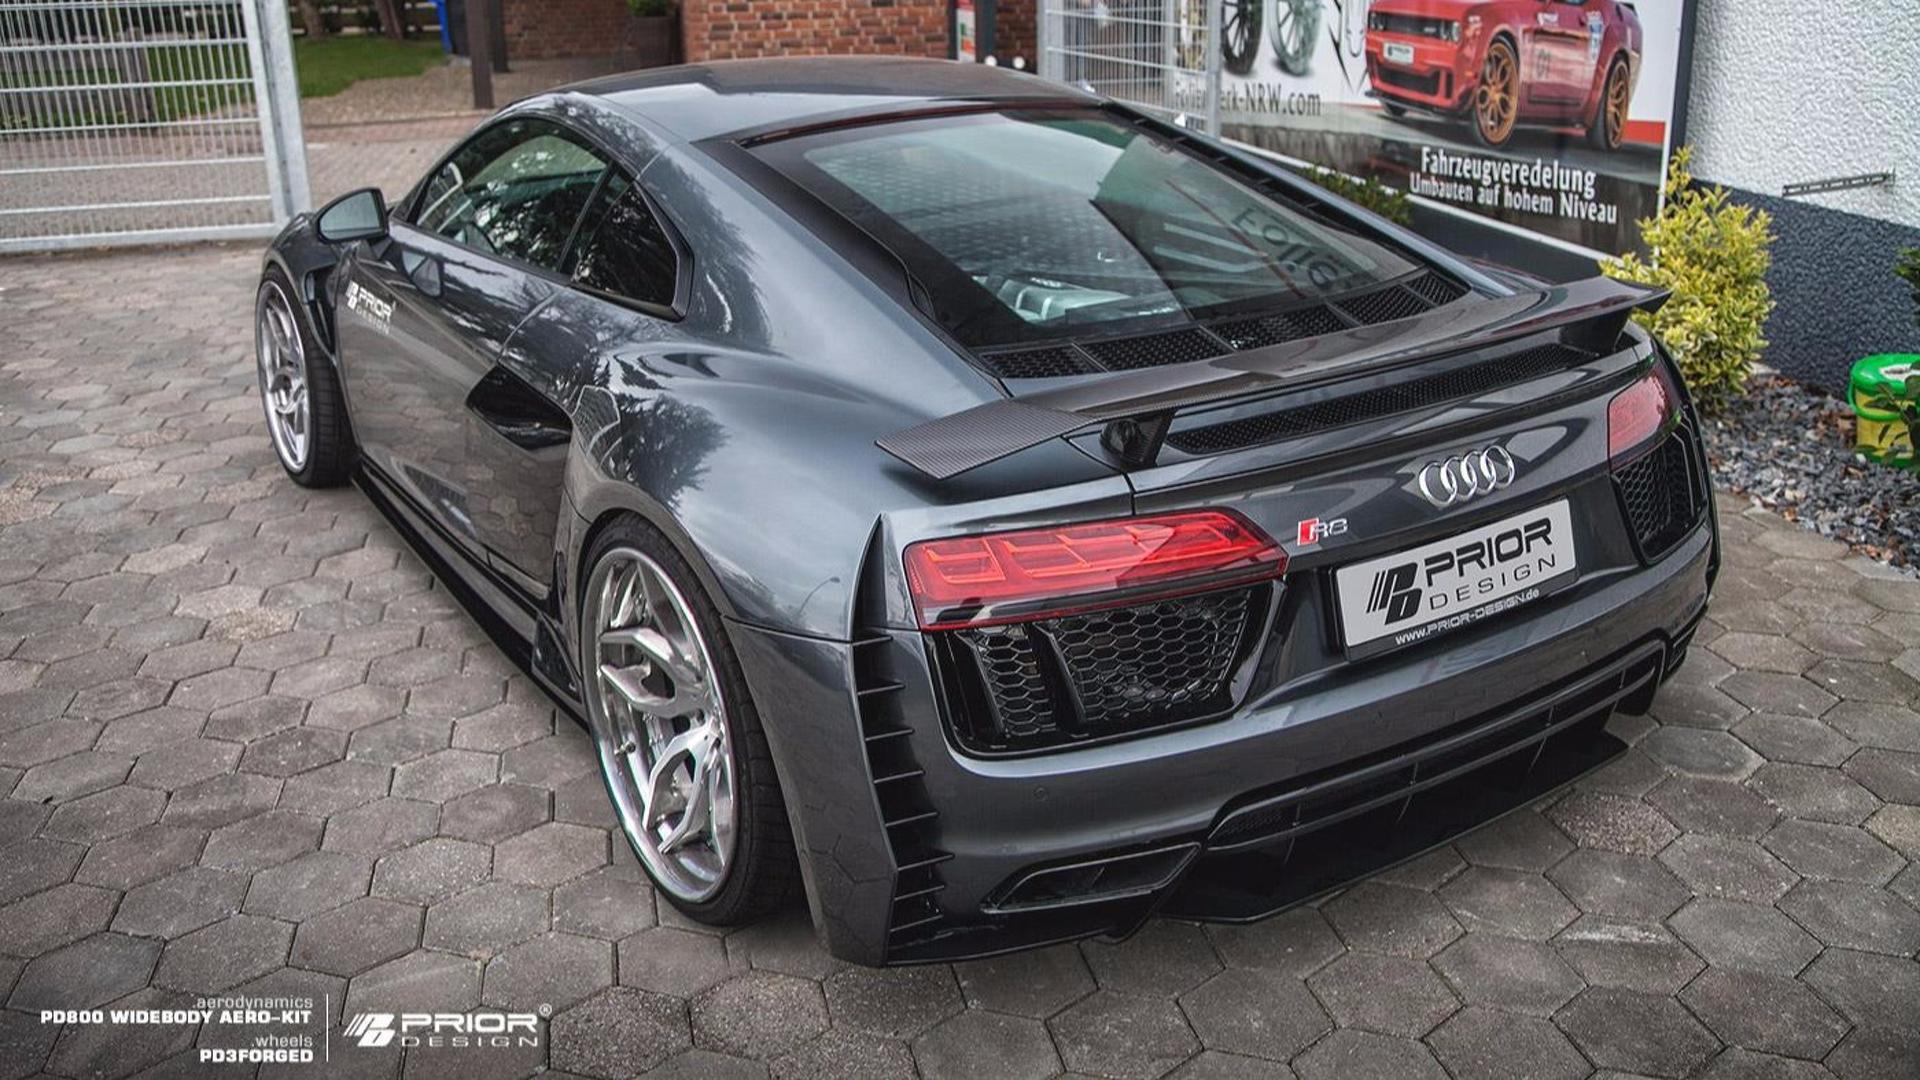 Audi R8 Muscles Up With Aggressive Wide Body Kit